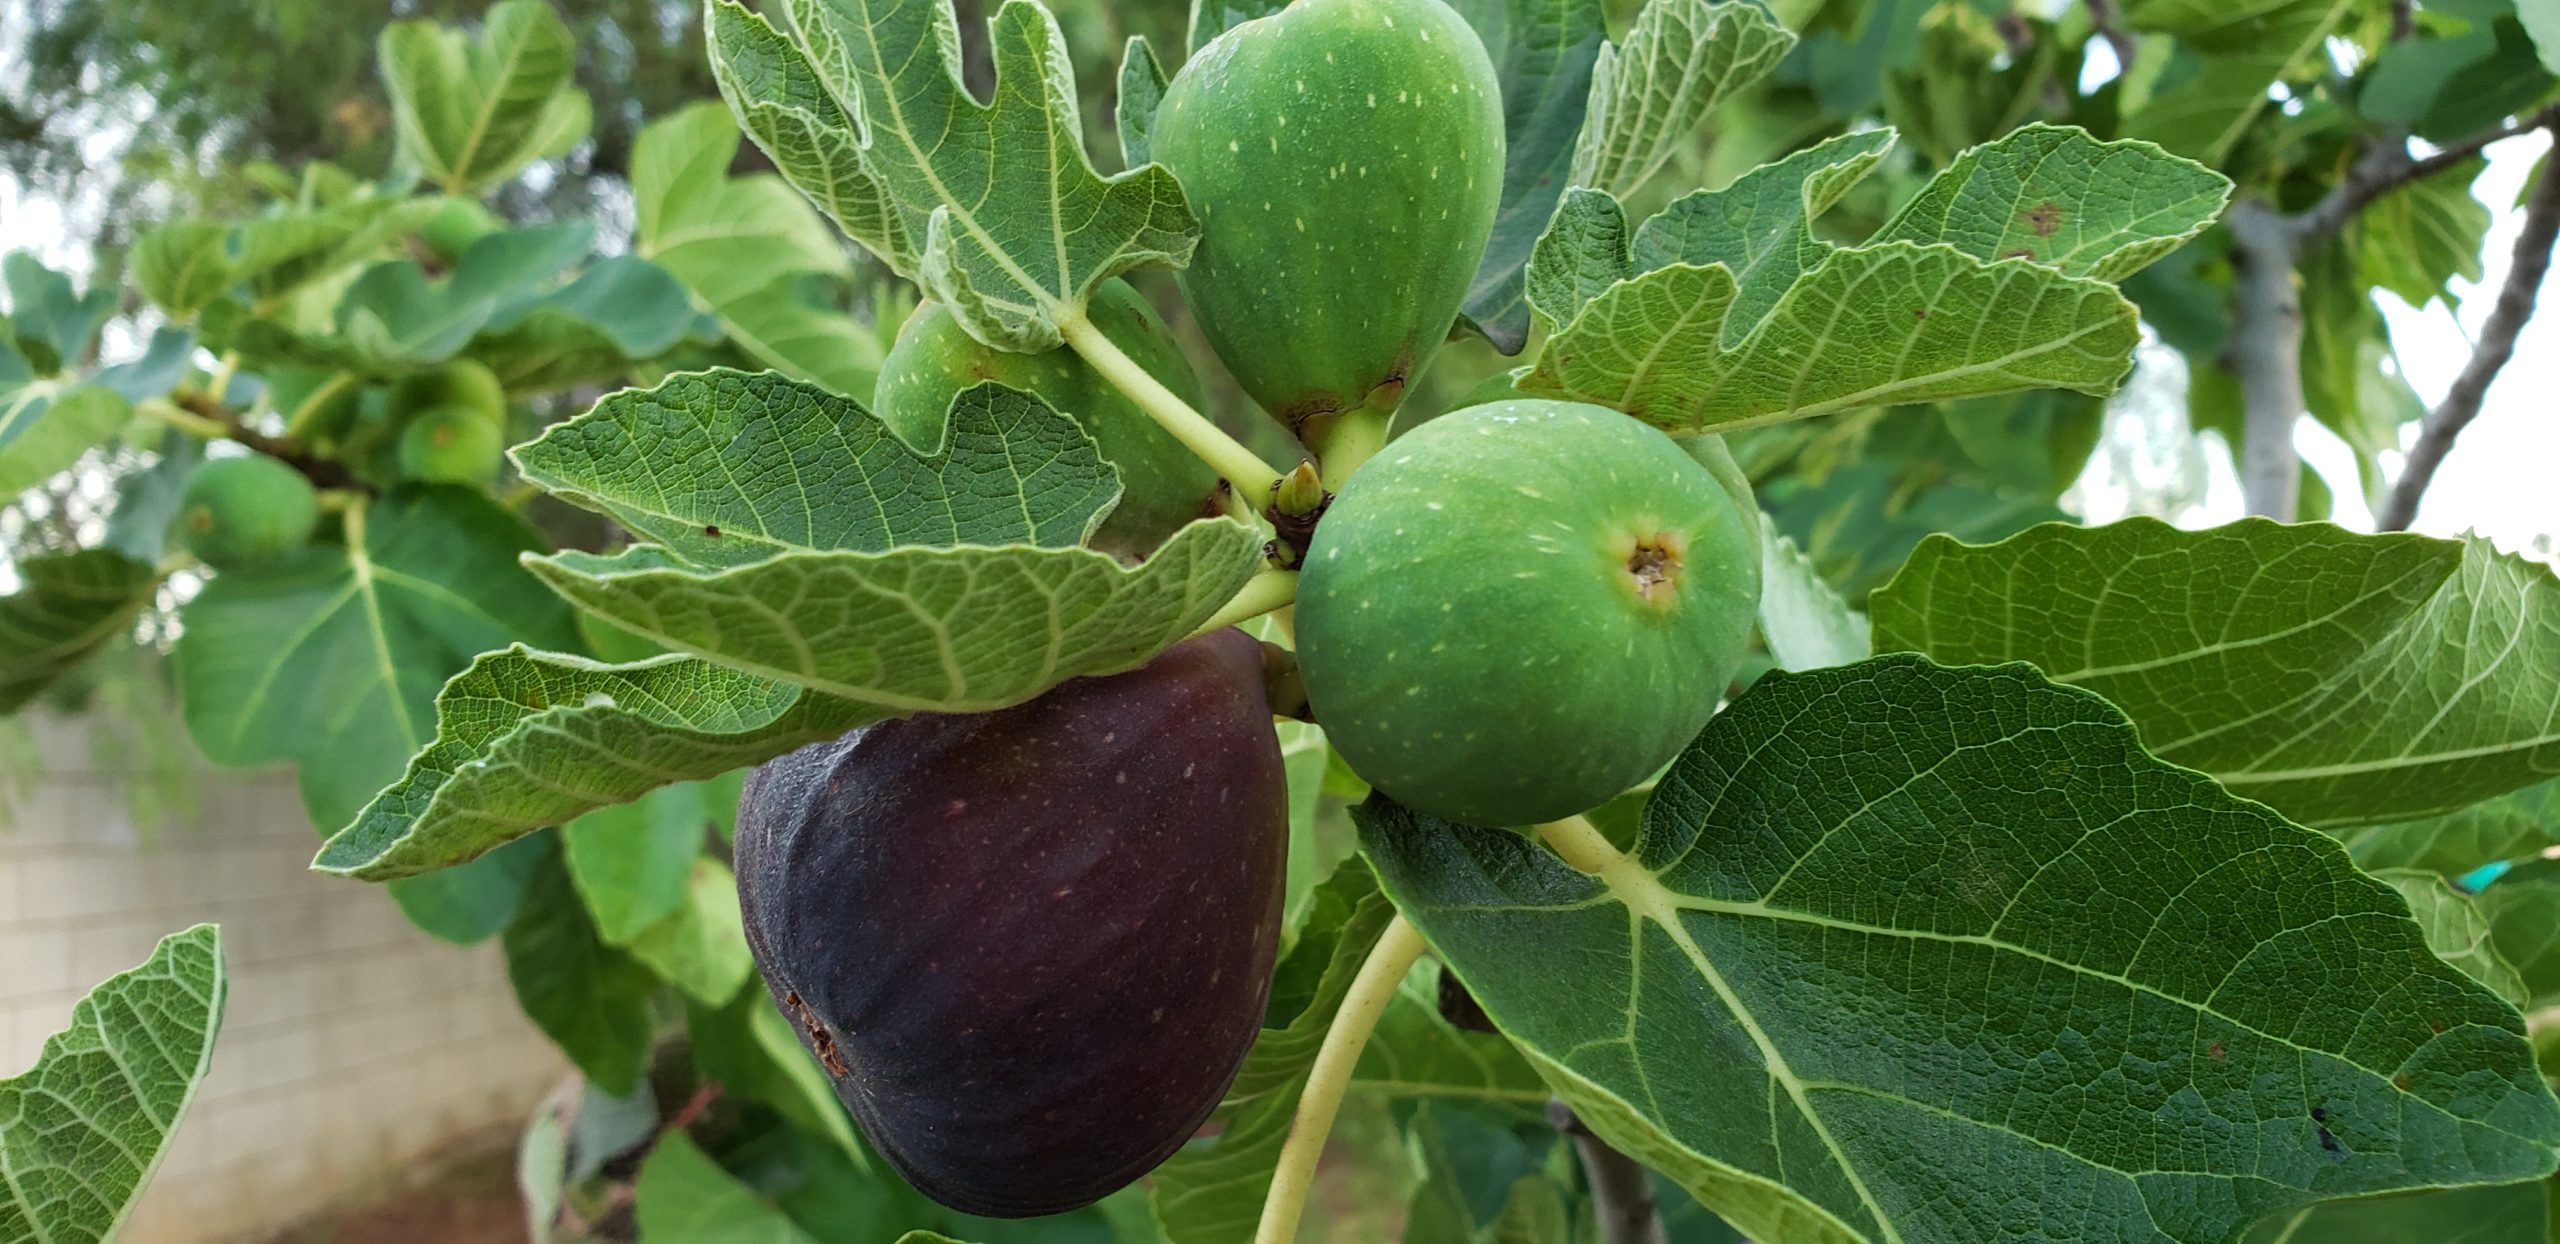 Great Garden Products - Black Mission Figs 20190805_192335